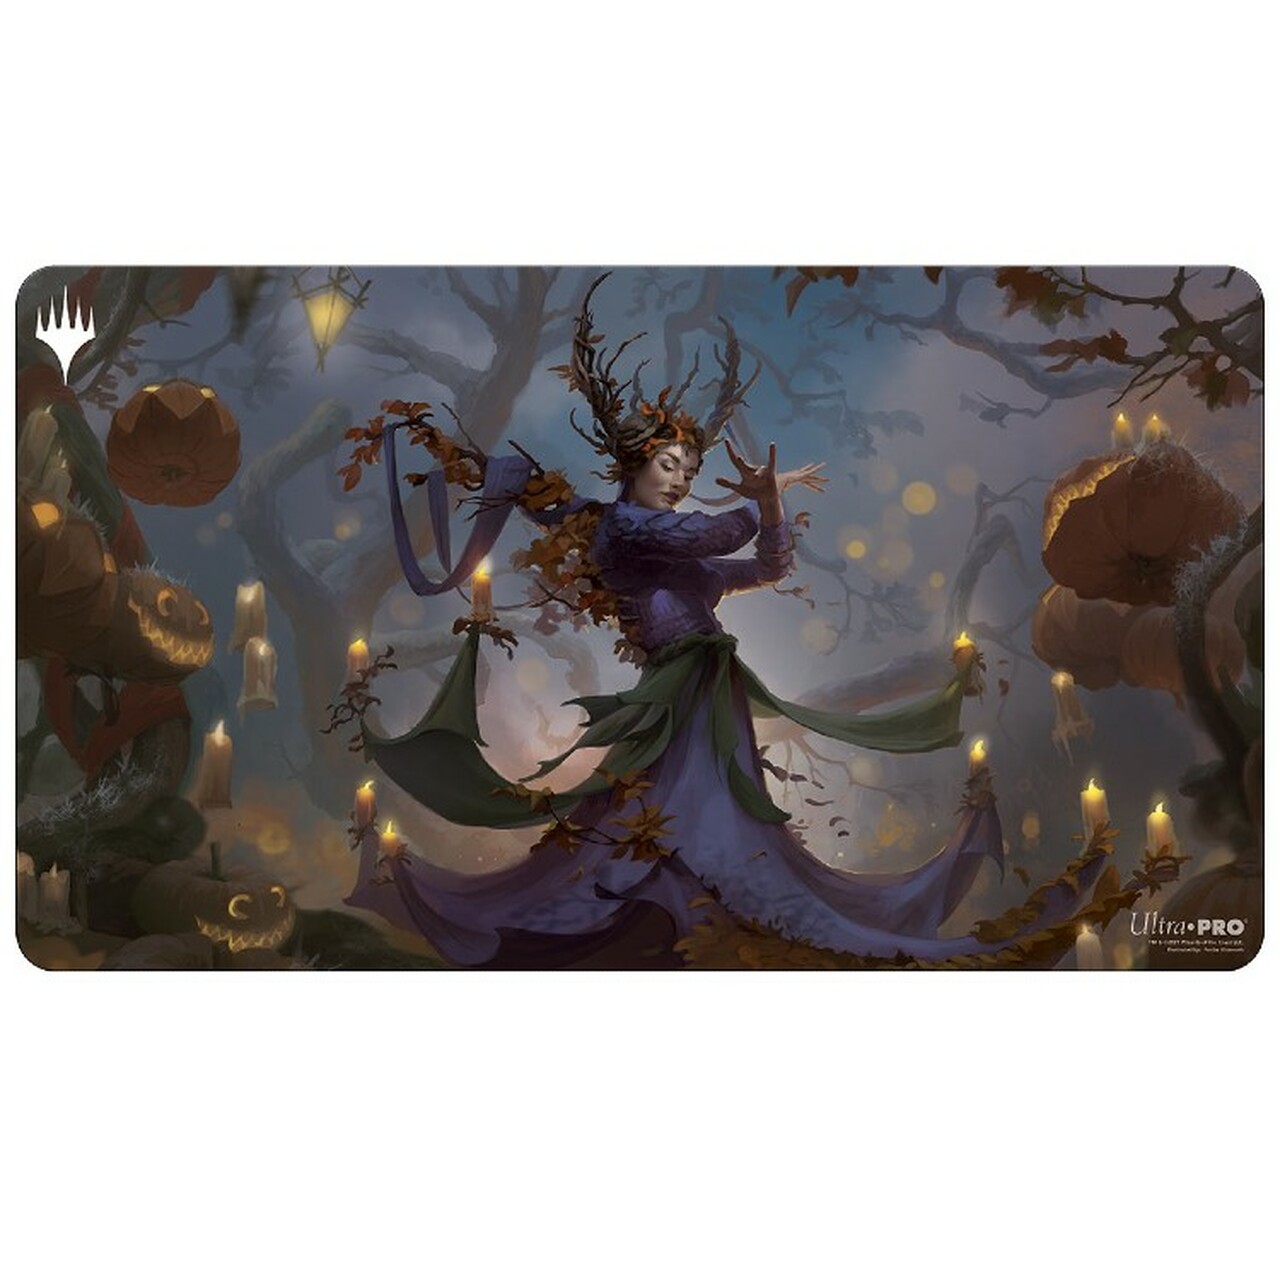 Ultra Pro Magic The Gathering Playmat Phenax V4 86147 Born of The Gods for sale online 